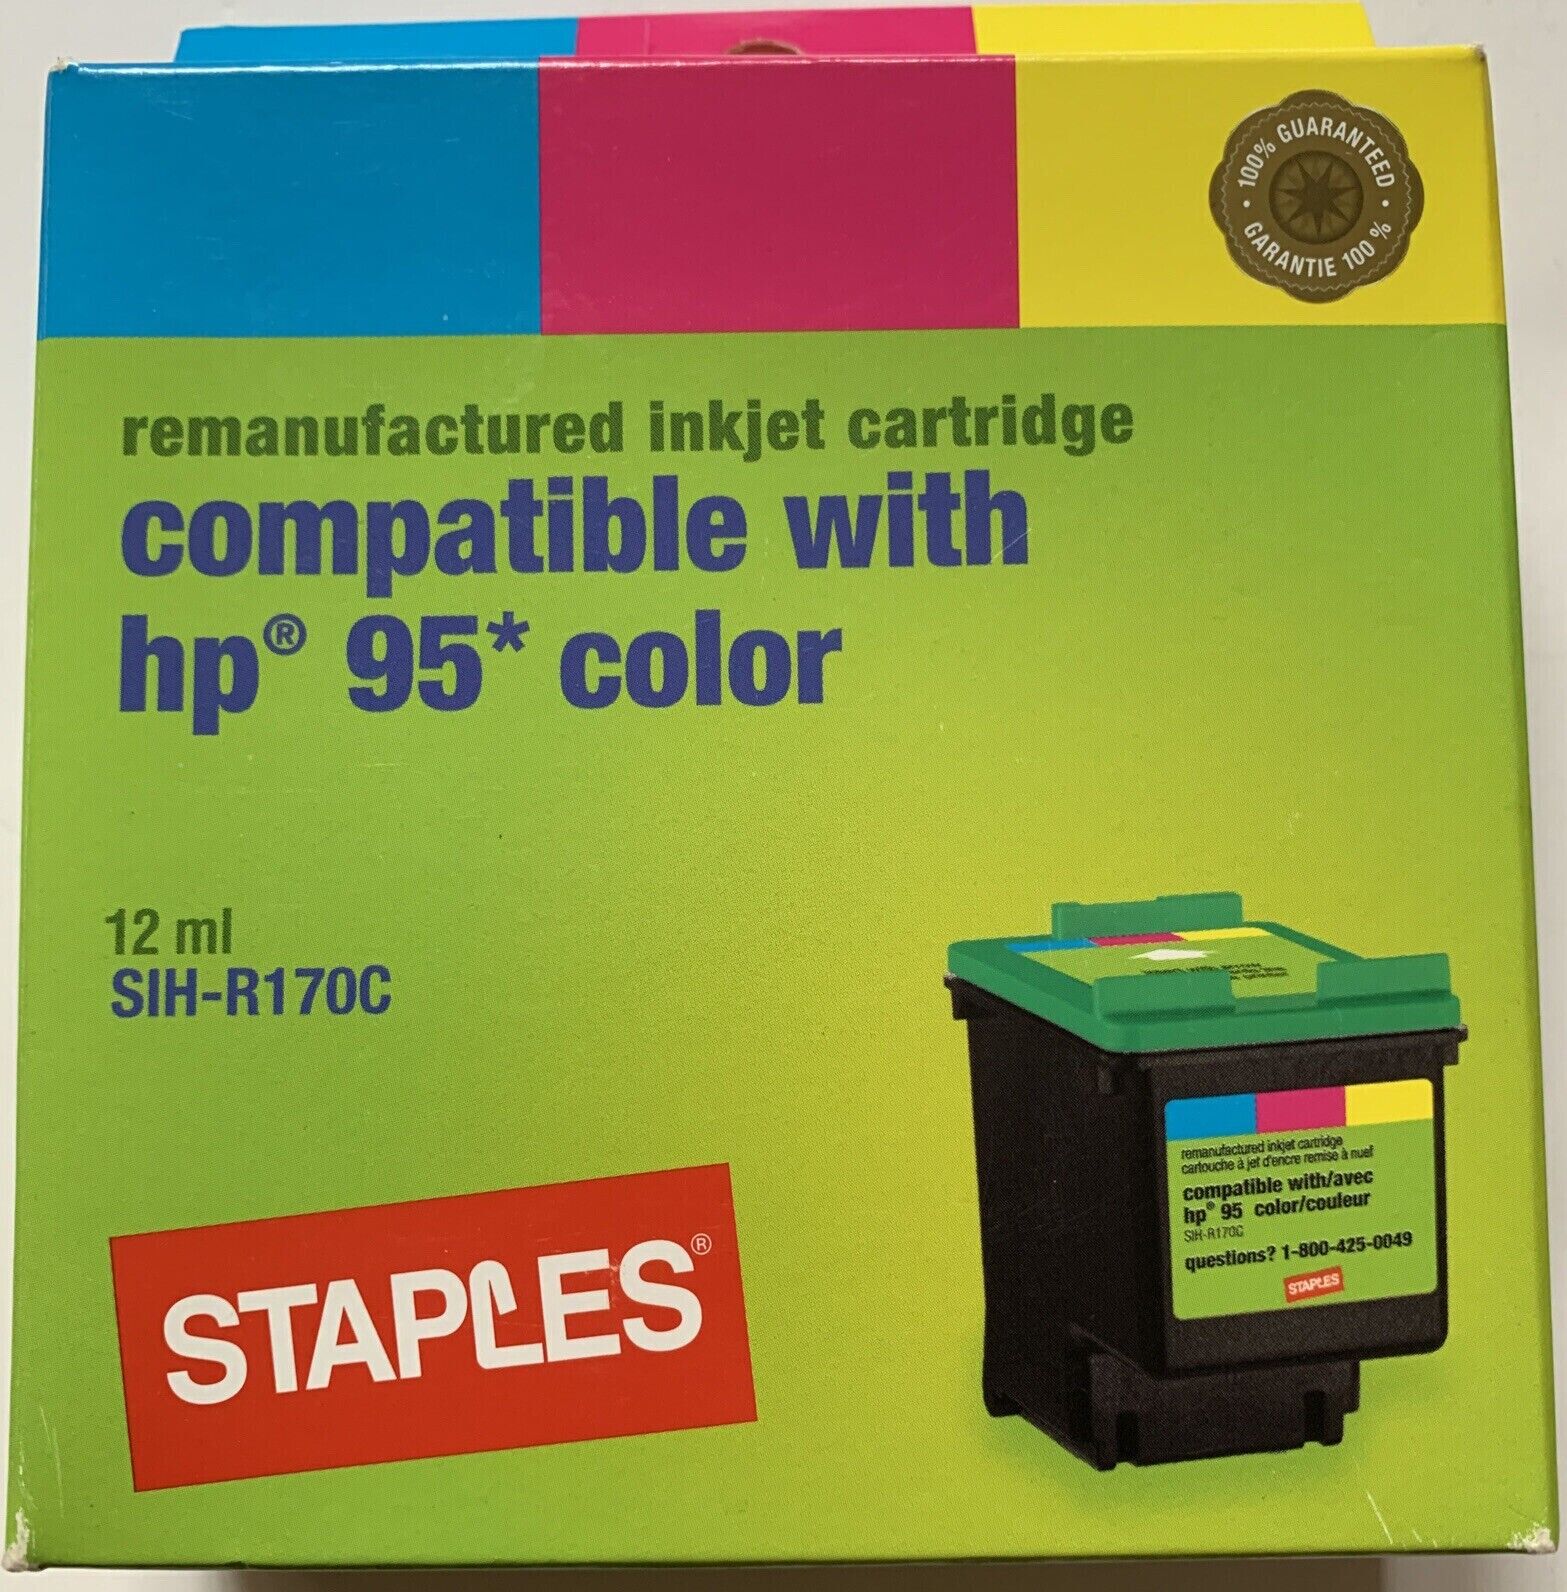 Brand New Staples Inkjet Catriidge compatible with HP 95 Color 12 ml. SIH-R170C